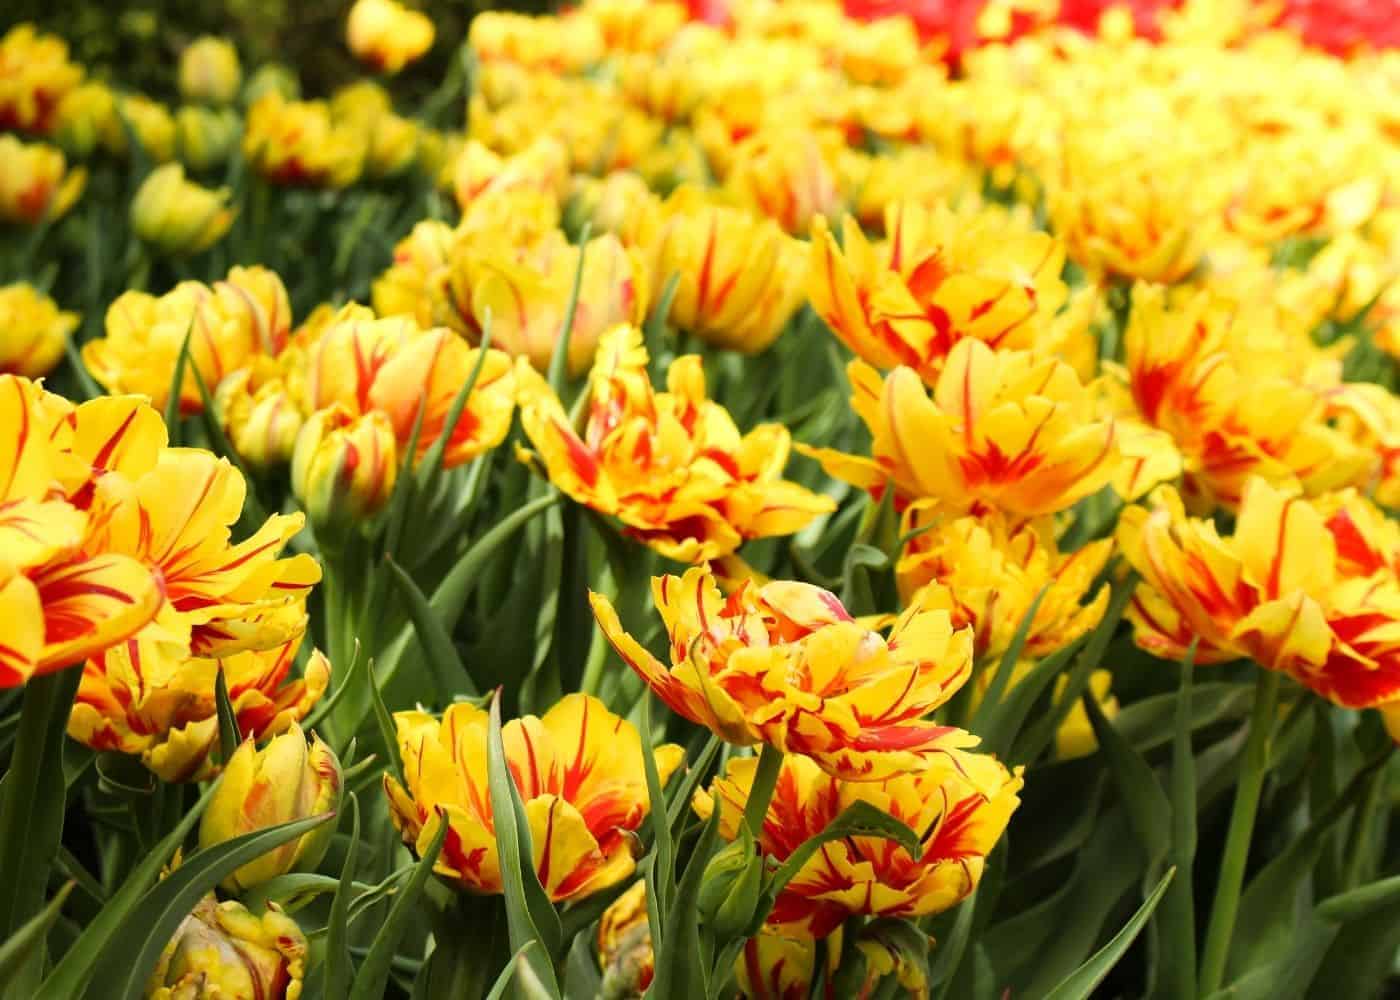 Monsella tulips - yellow tulips with red stripes